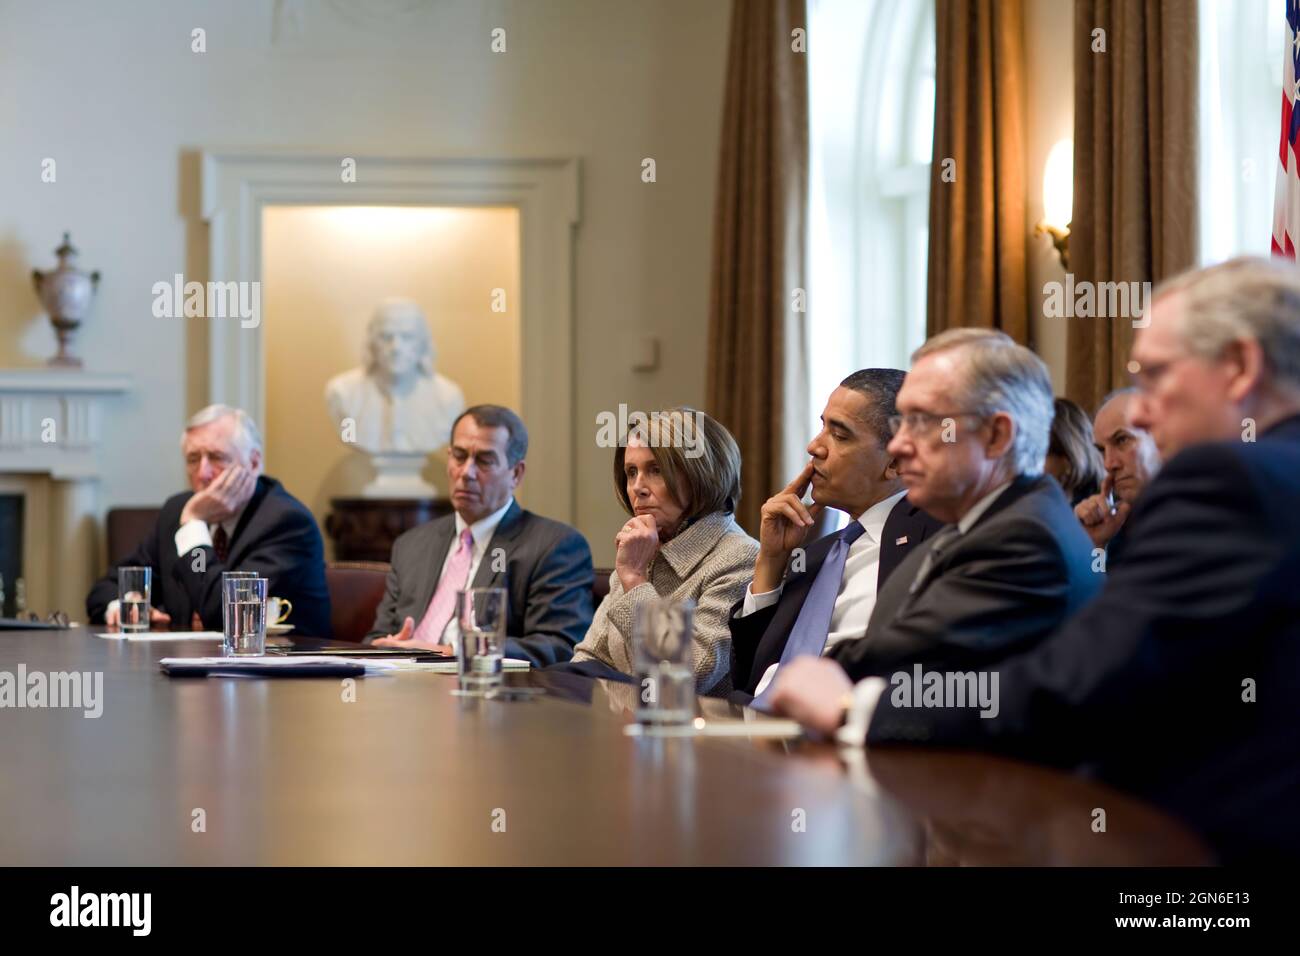 President Barack Obama meets with bipartisan leaders of the House and Senate, including from left, House Majority Leader Steny Hoyer (D-Md.), House Republican Leader John A. Boehner (R-Ohio), Speaker of the House Nancy Pelosi (D-Cal.), Senate Majority Leader Harry Reid (D-Nev.),  and Senate Republican Leader Mitch McConnell (R-Ky.) to discuss working together on issues surrounding the economy and jobs in the Cabinet Room of the White House, Feb. 10, 2010.  (Official White House Photo by Pete Souza) This official White House photograph is being made available only for publication by news organi Stock Photo